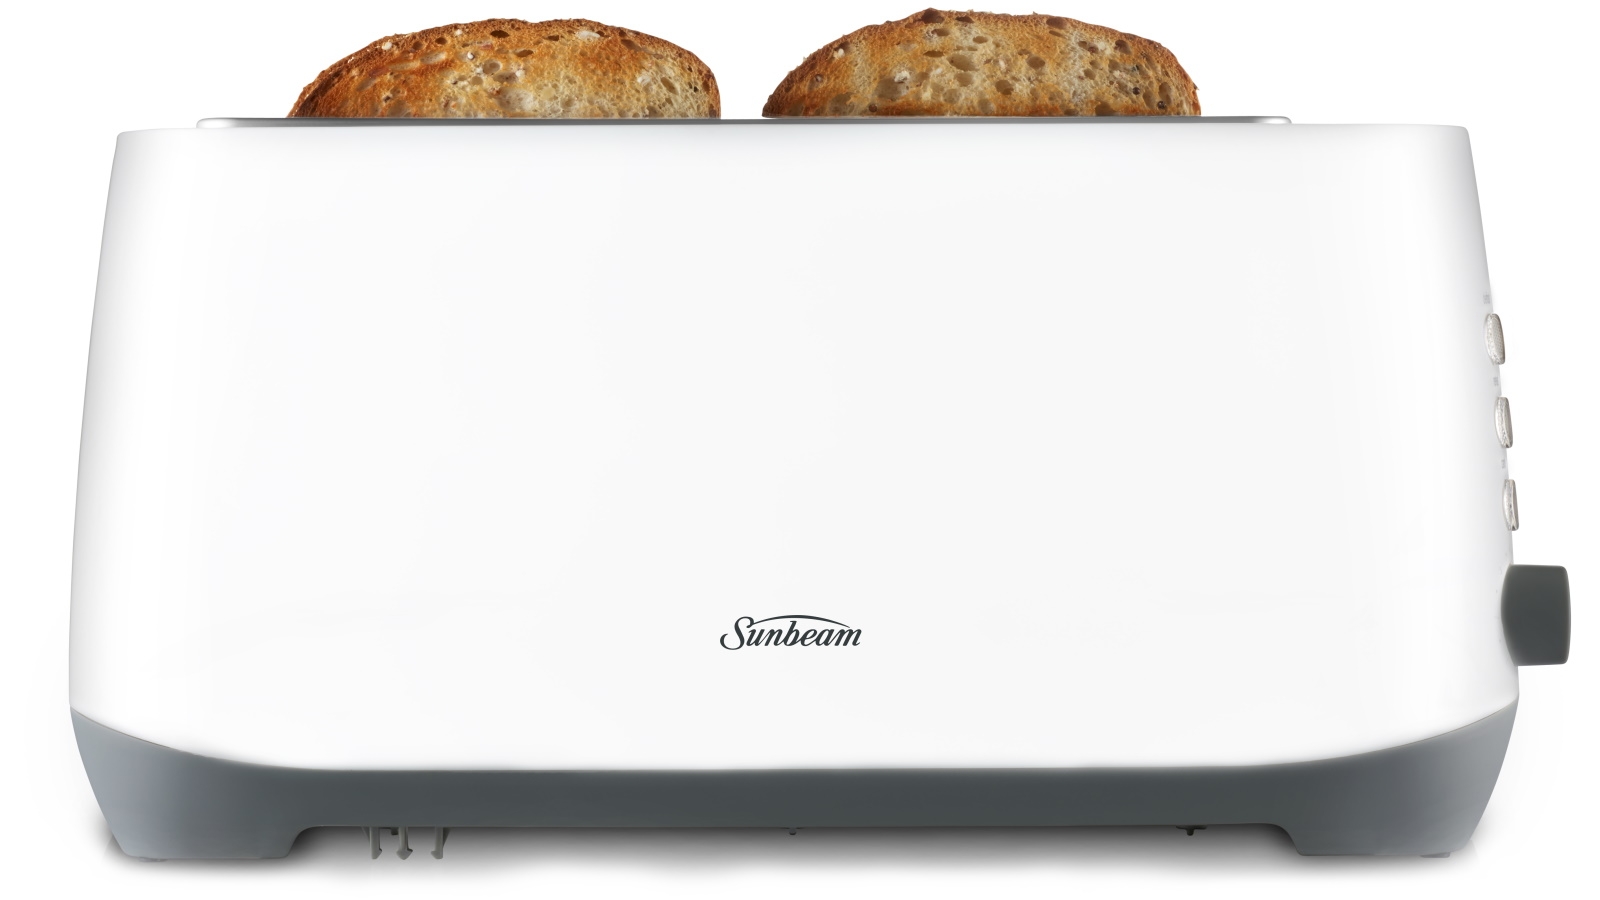 Sunbeam 4 Slice Toaster With Retractable Cord White 027045703659 for sale  online